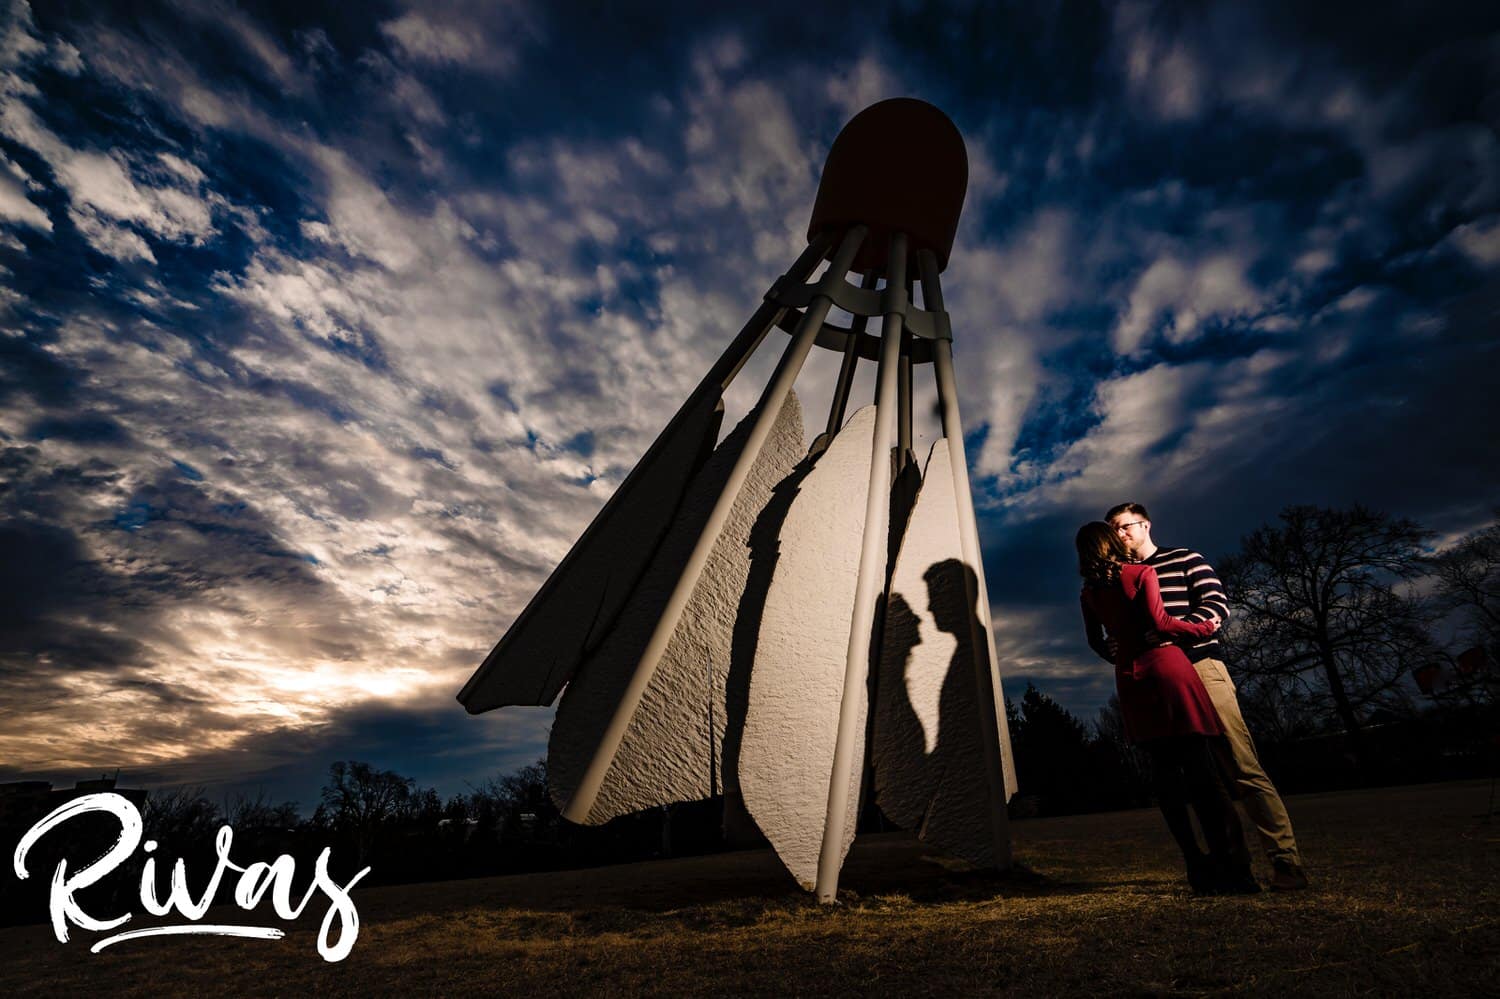 A dramatic portrait of an engaged couple sharing an embrace in front of an iconic shuttlecock on the lawn of the Nelson Atkins Museum of Art in Kansas City. 